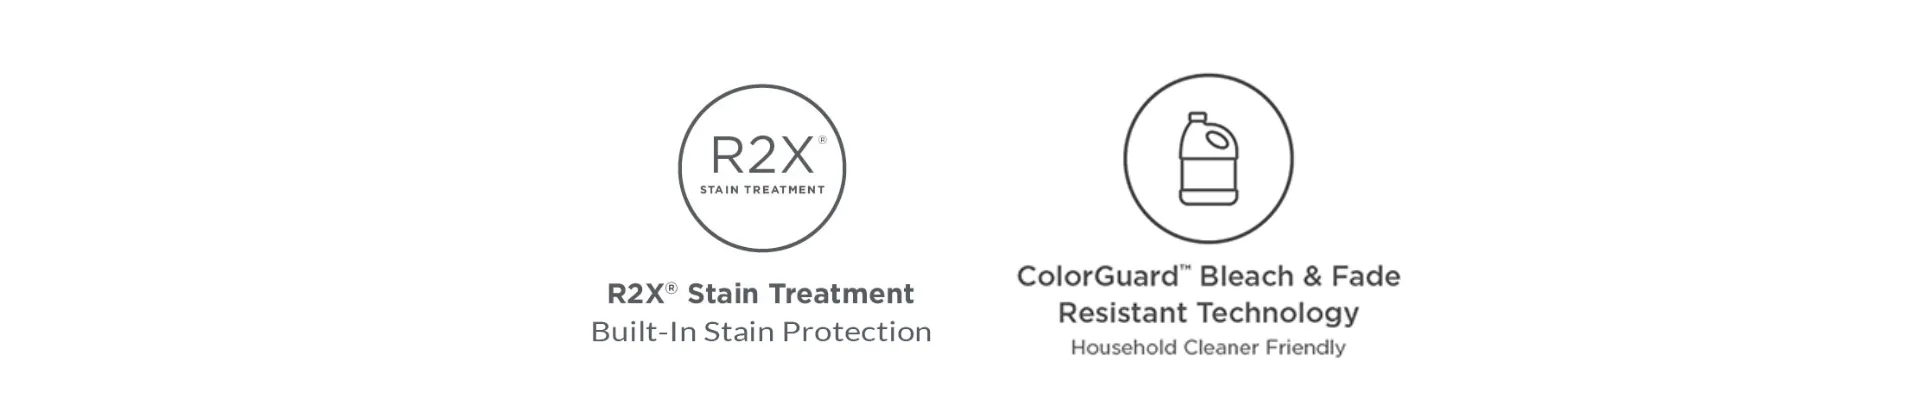 Enhanced icons R2X Stain Treatment built-in stain protection and ColorGuard Bleach & Fade Resistant Technology household cleaner friendly